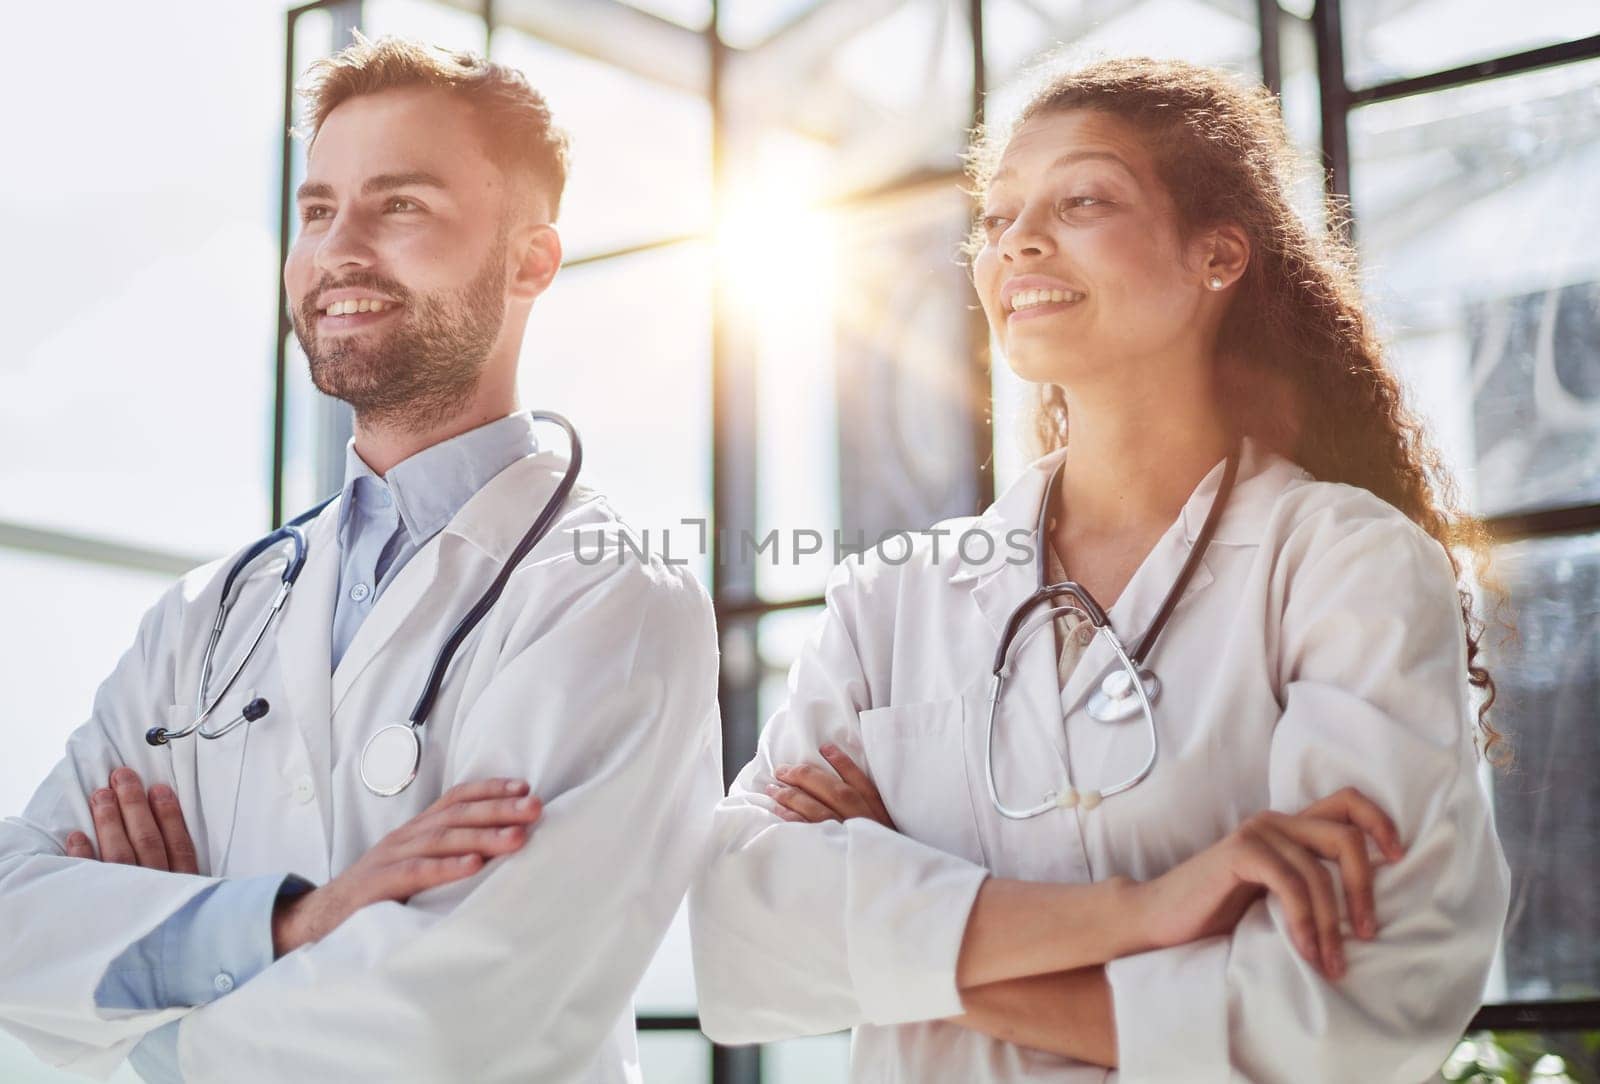 Young male and female dentists look into the distance in a hospital room